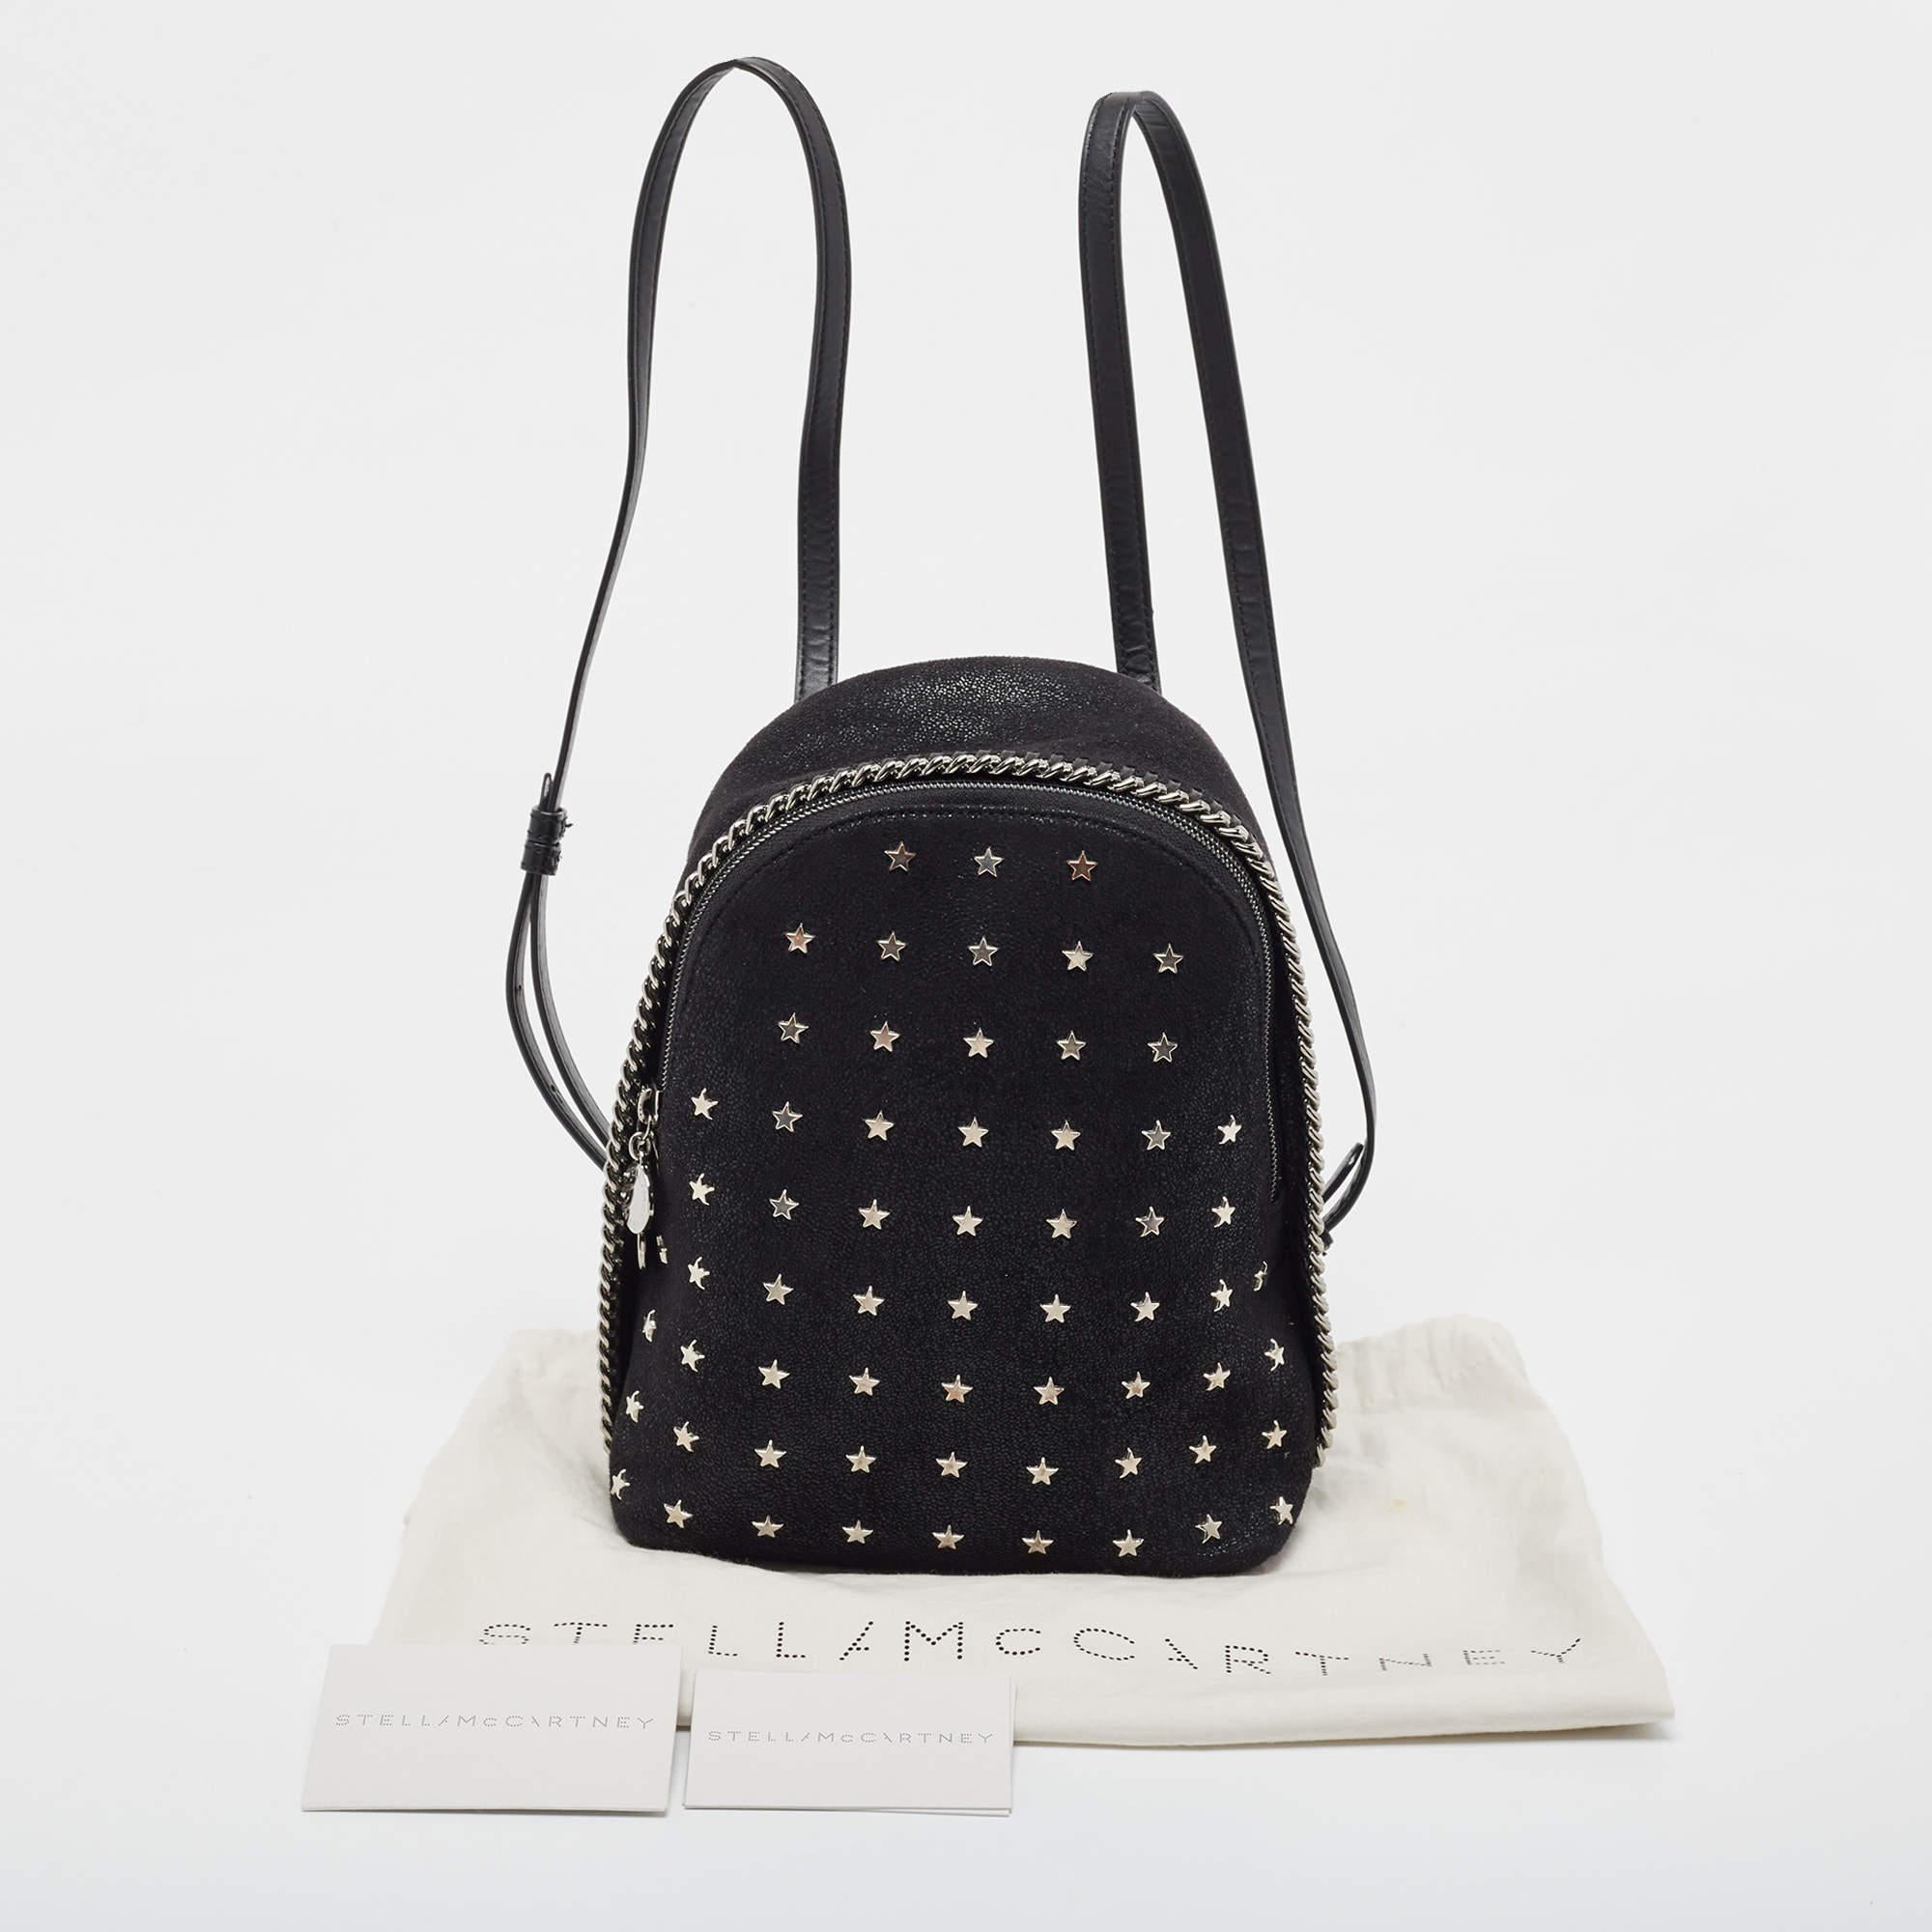 Stella McCartney Black Faux Leather Falabella Backpack For Sale 10